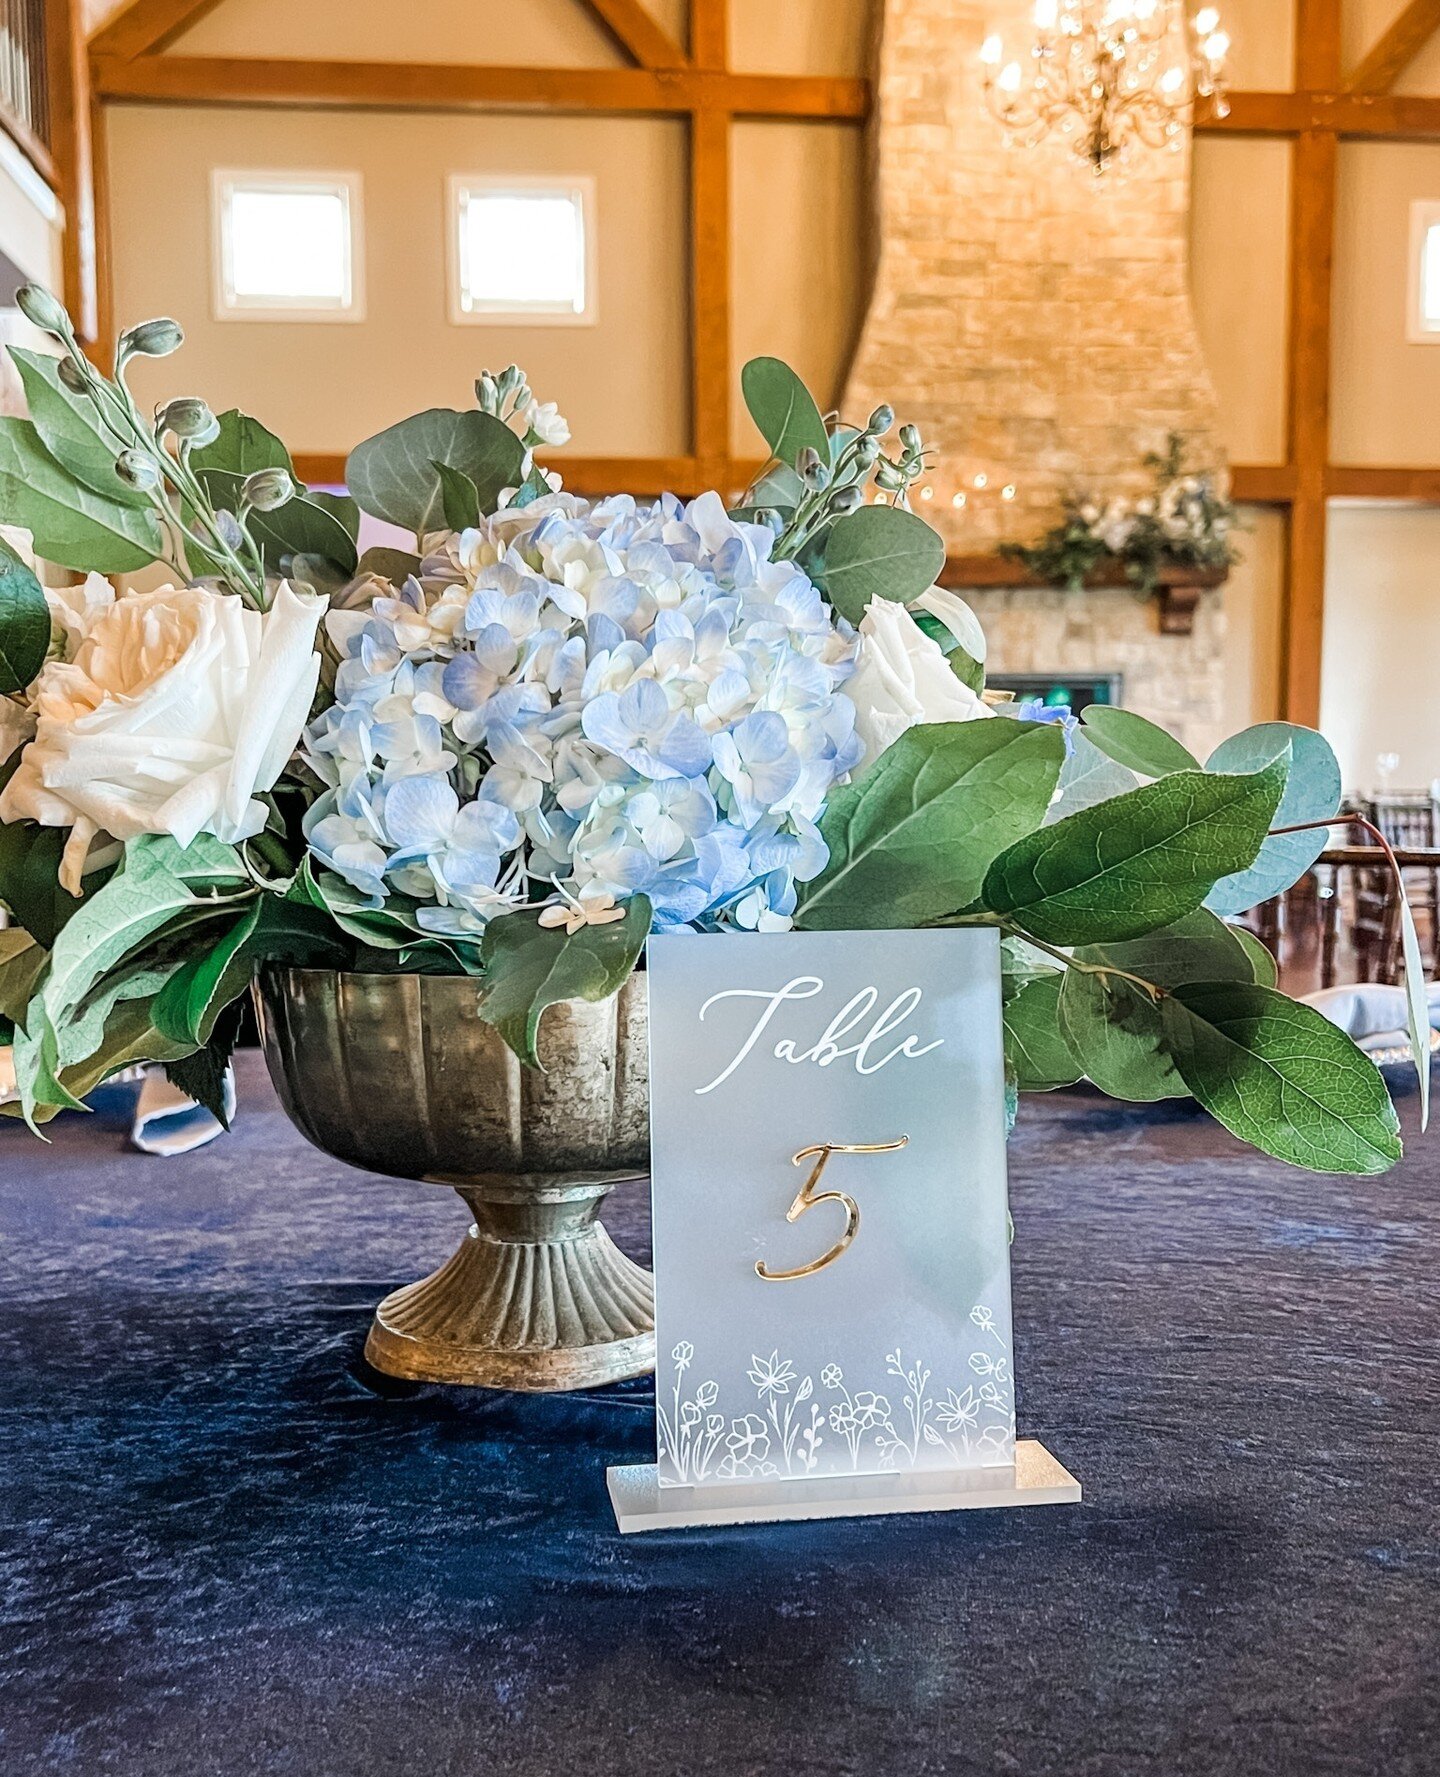 Nothing like an acrylic table number that pairs perfectly with floral centerpieces.⁠
.⁠
.⁠
.⁠
.⁠
.⁠
#tablenumbers #acrylicstationery #penstruckdesign #wedding2022 #weddingstationery #wedding #weddings #weddinginspiration #weddinginspo #bridetobe #inv